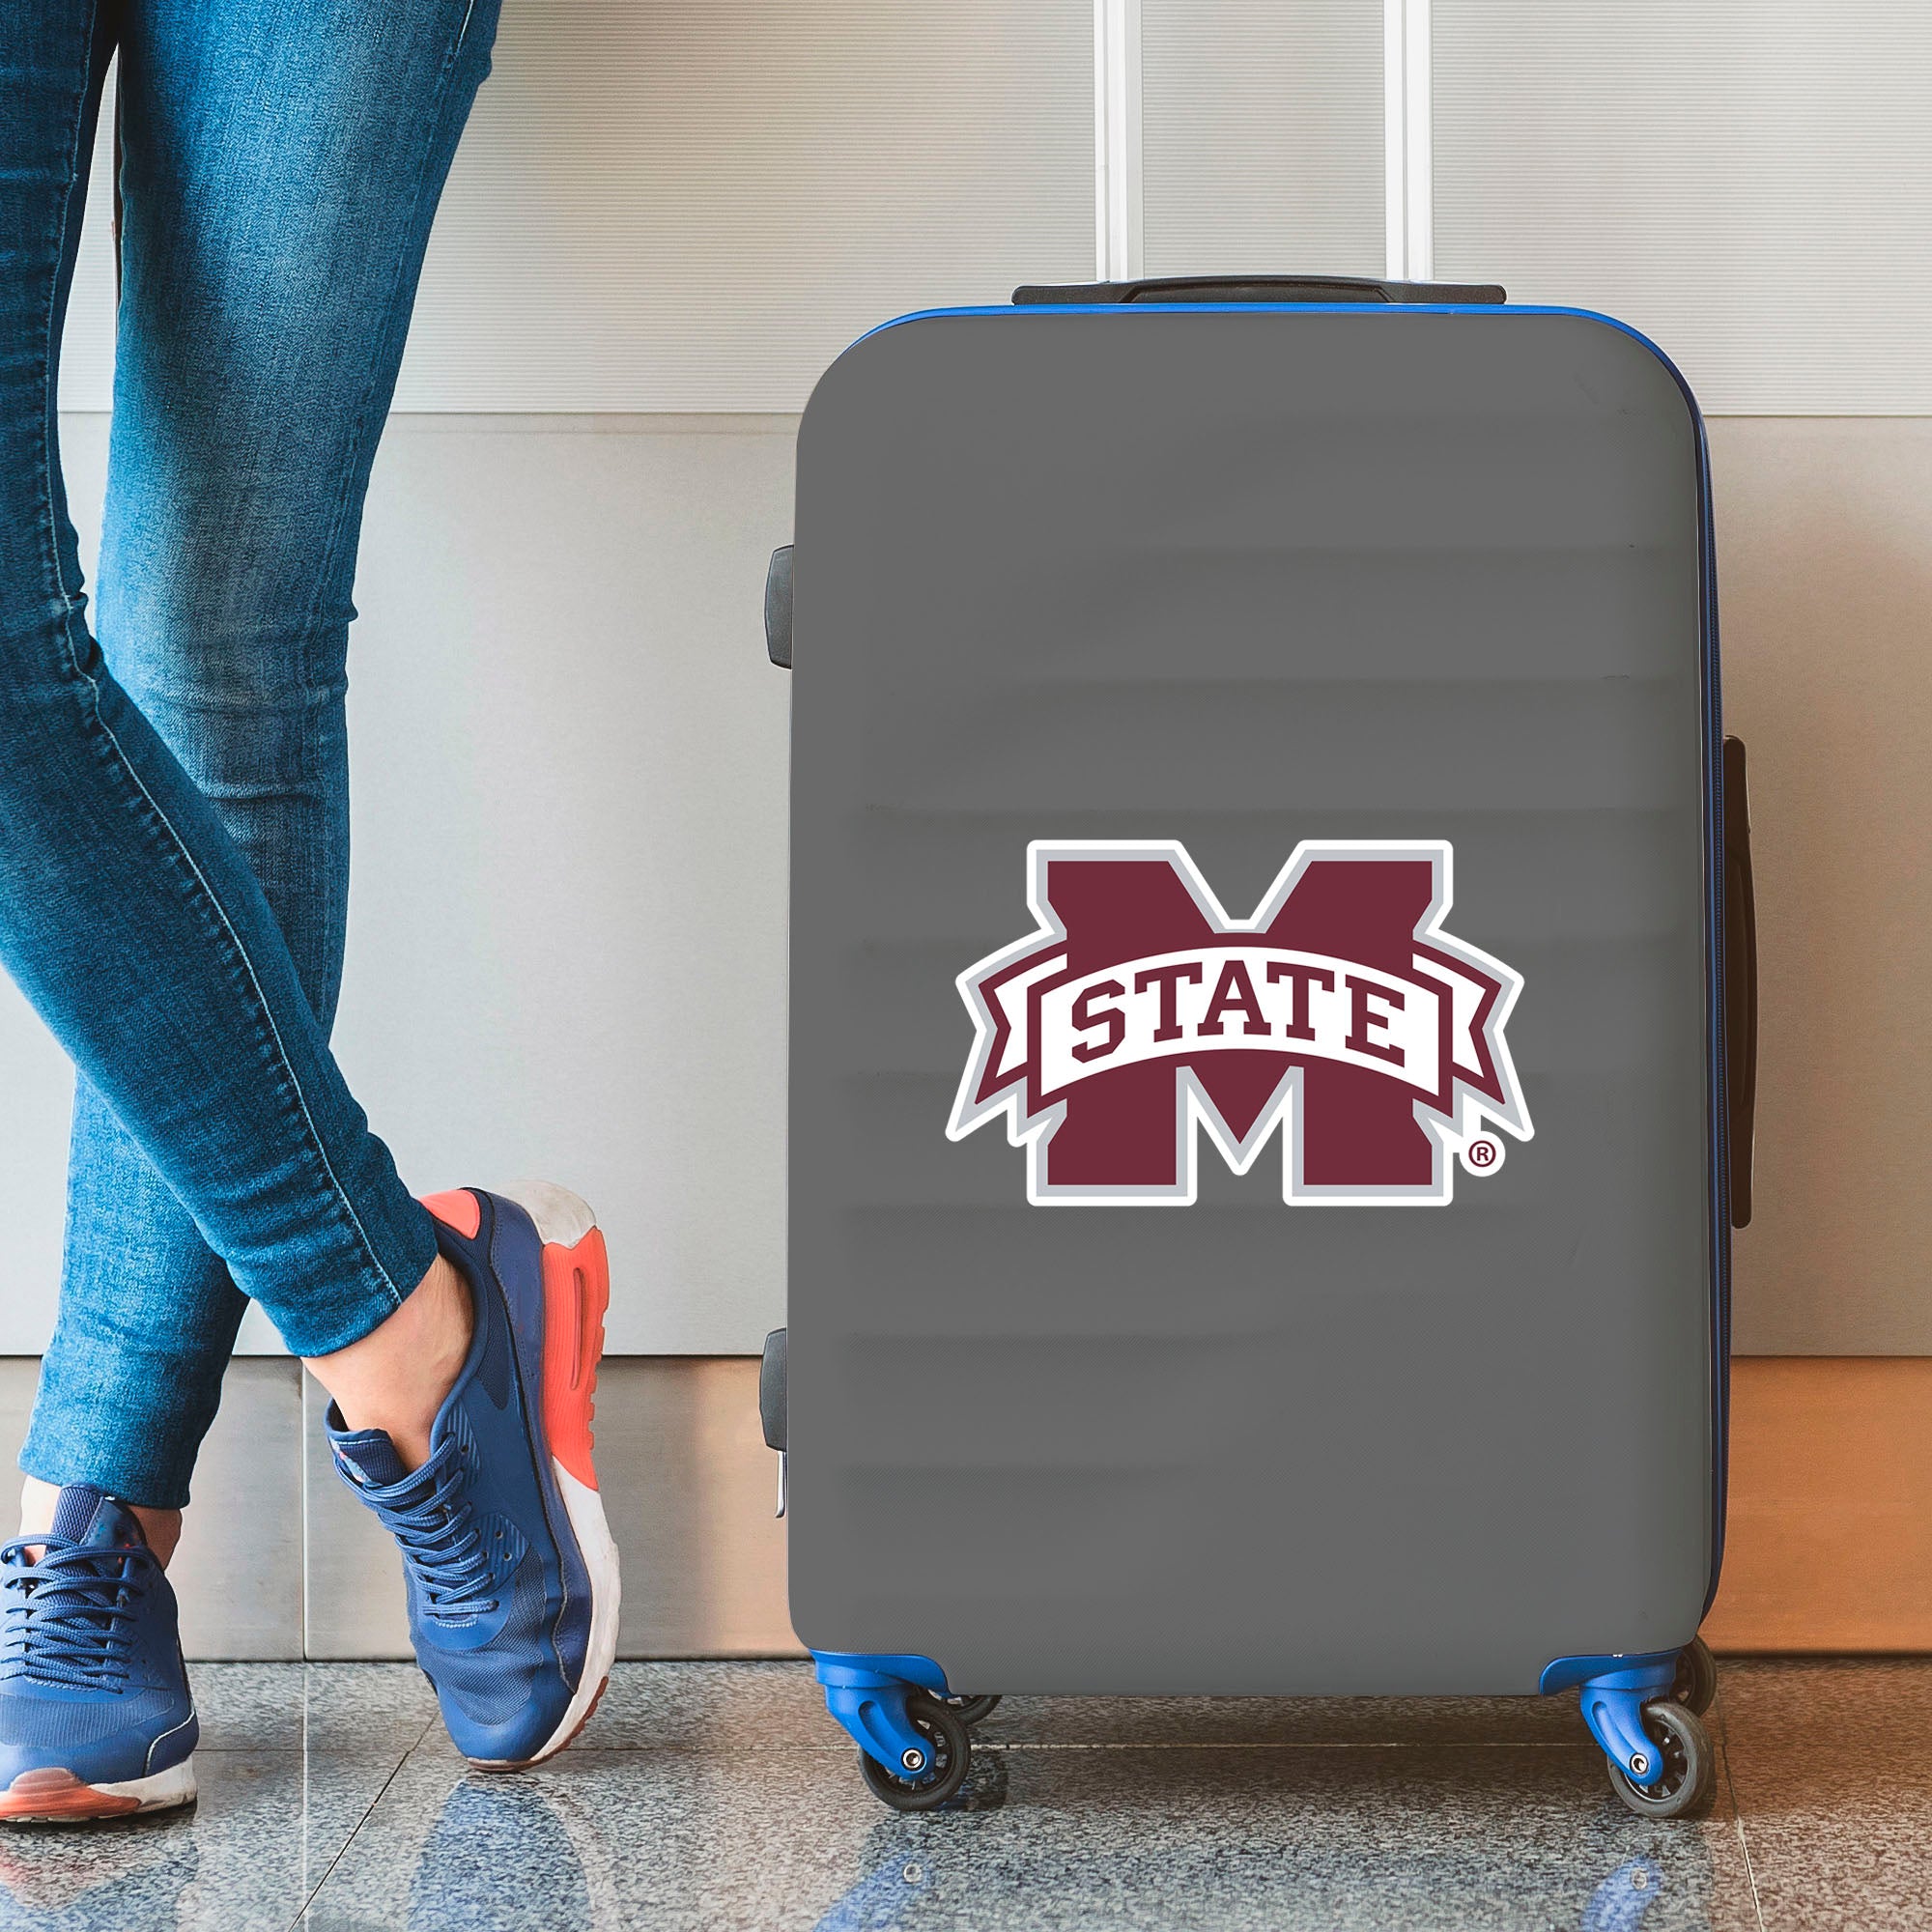 FANMATS, Mississippi State University Large Decal Sticker